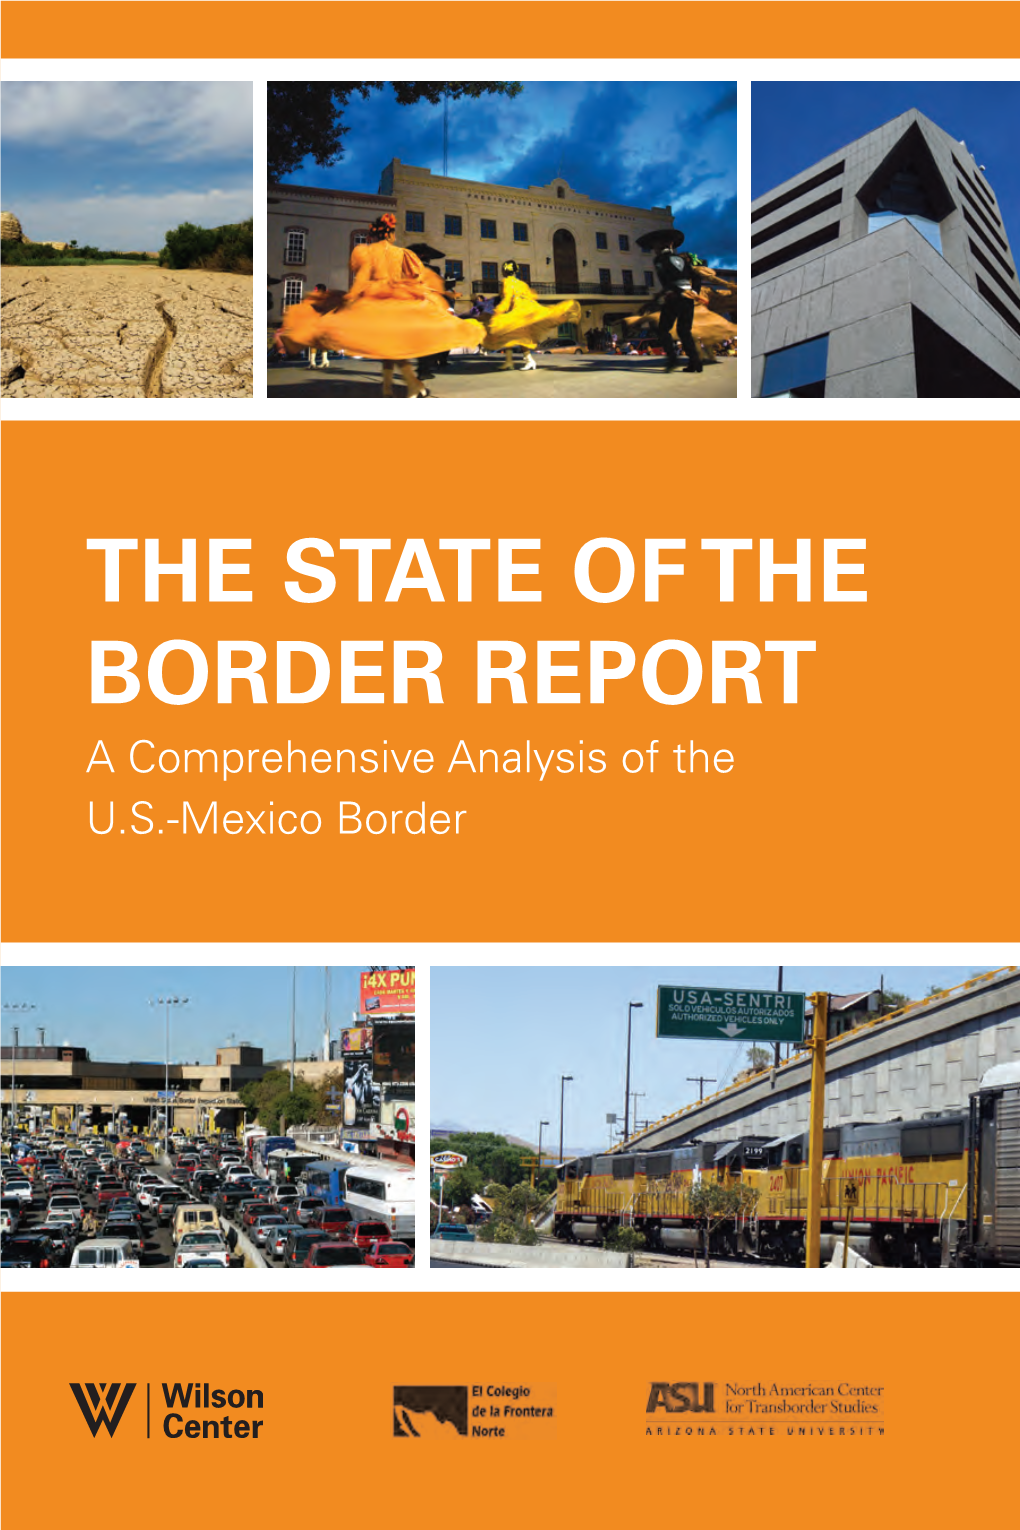 The State of the Border Report a Comprehensive Analysis of the U.S.-Mexico Border the State of the Border Report a Comprehensive Analysis of the U.S.-Mexico Border